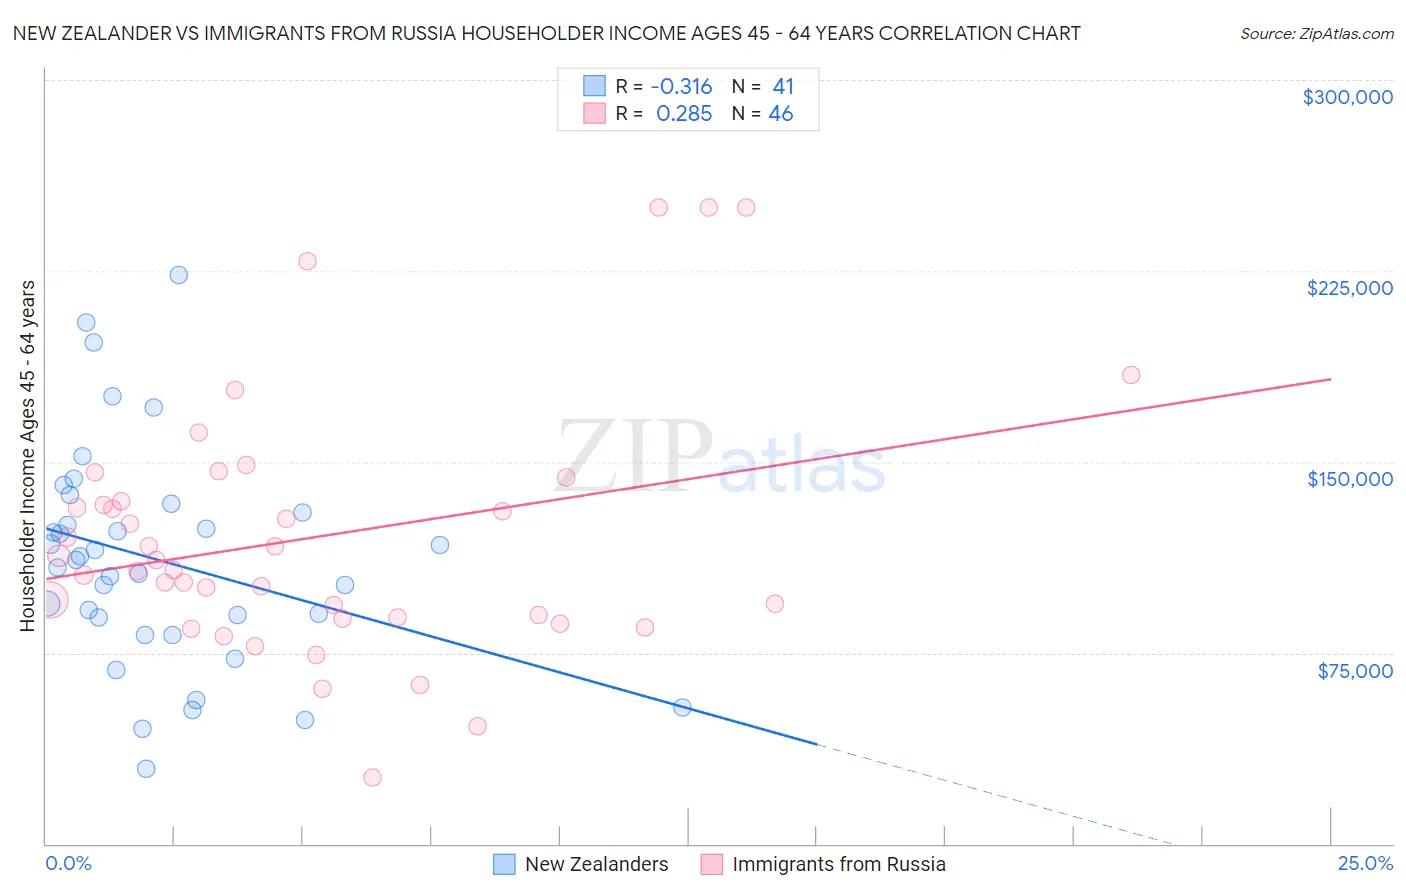 New Zealander vs Immigrants from Russia Householder Income Ages 45 - 64 years